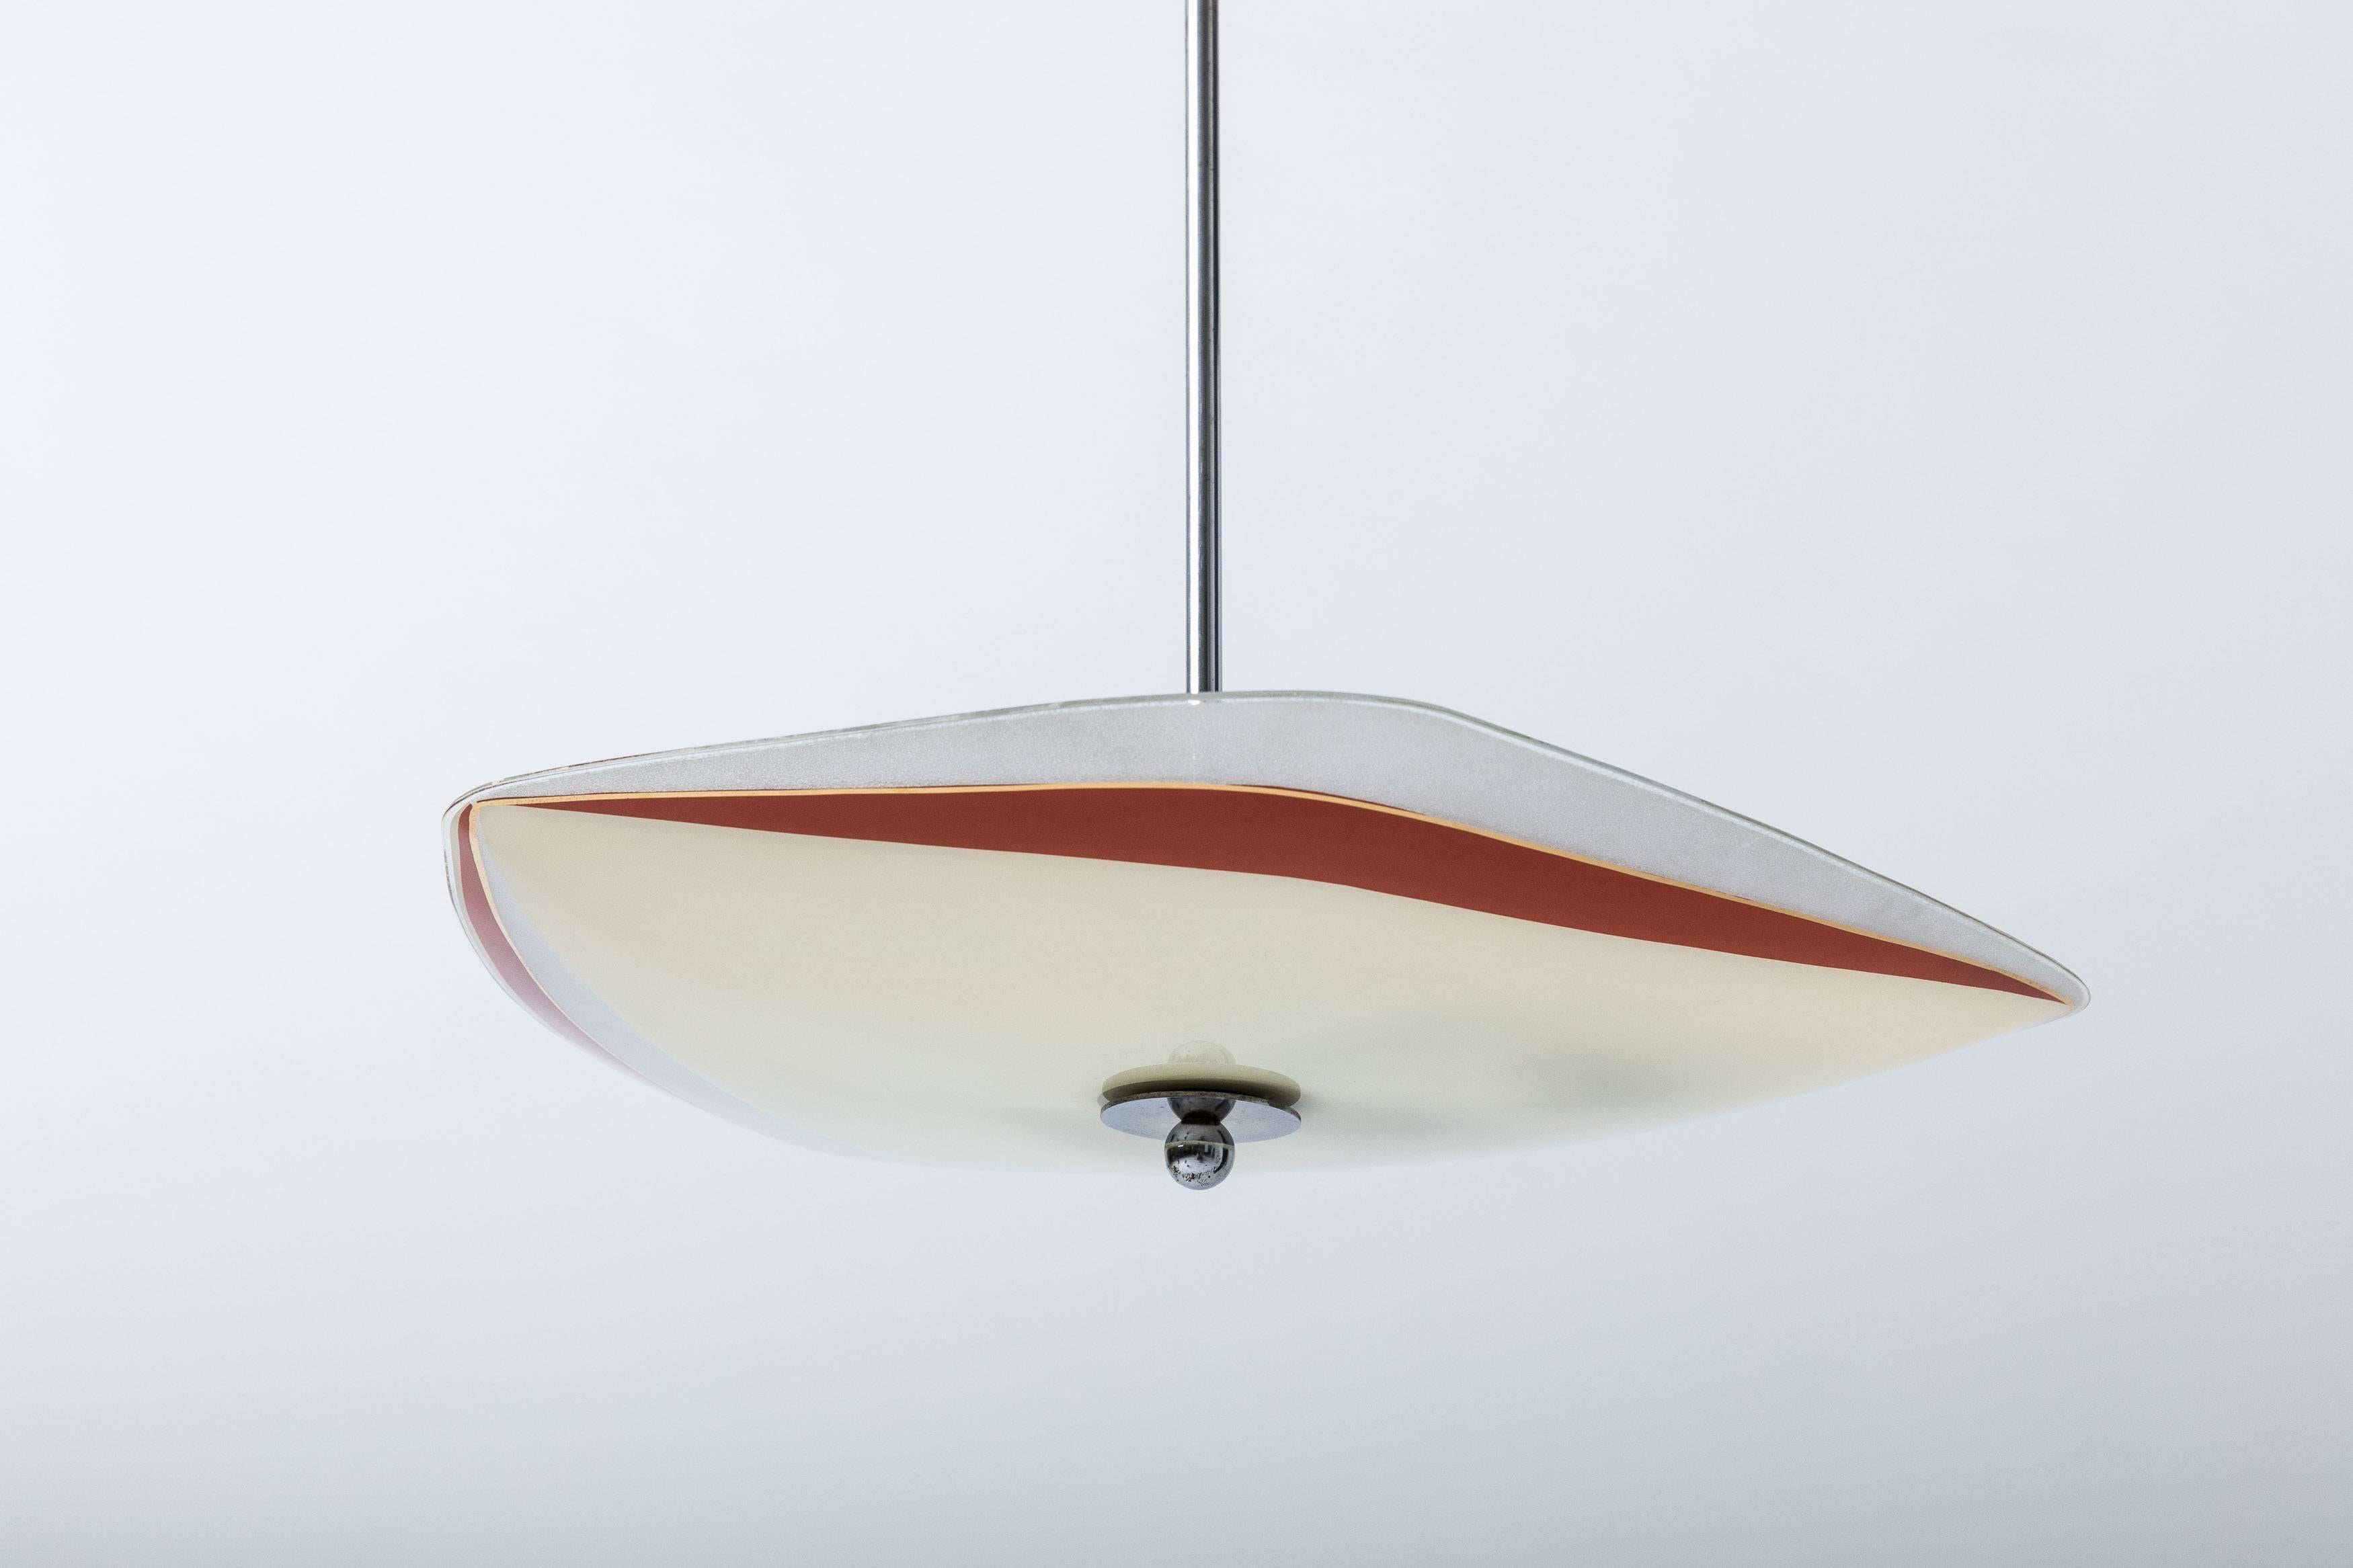 Ceiling light made from painted glass in an excellent condition.

This pendant light is suitable for E27 Edison Screw (ES) light bulbs for Europe and E26 ES universal line-voltage light bulbs for the USA.